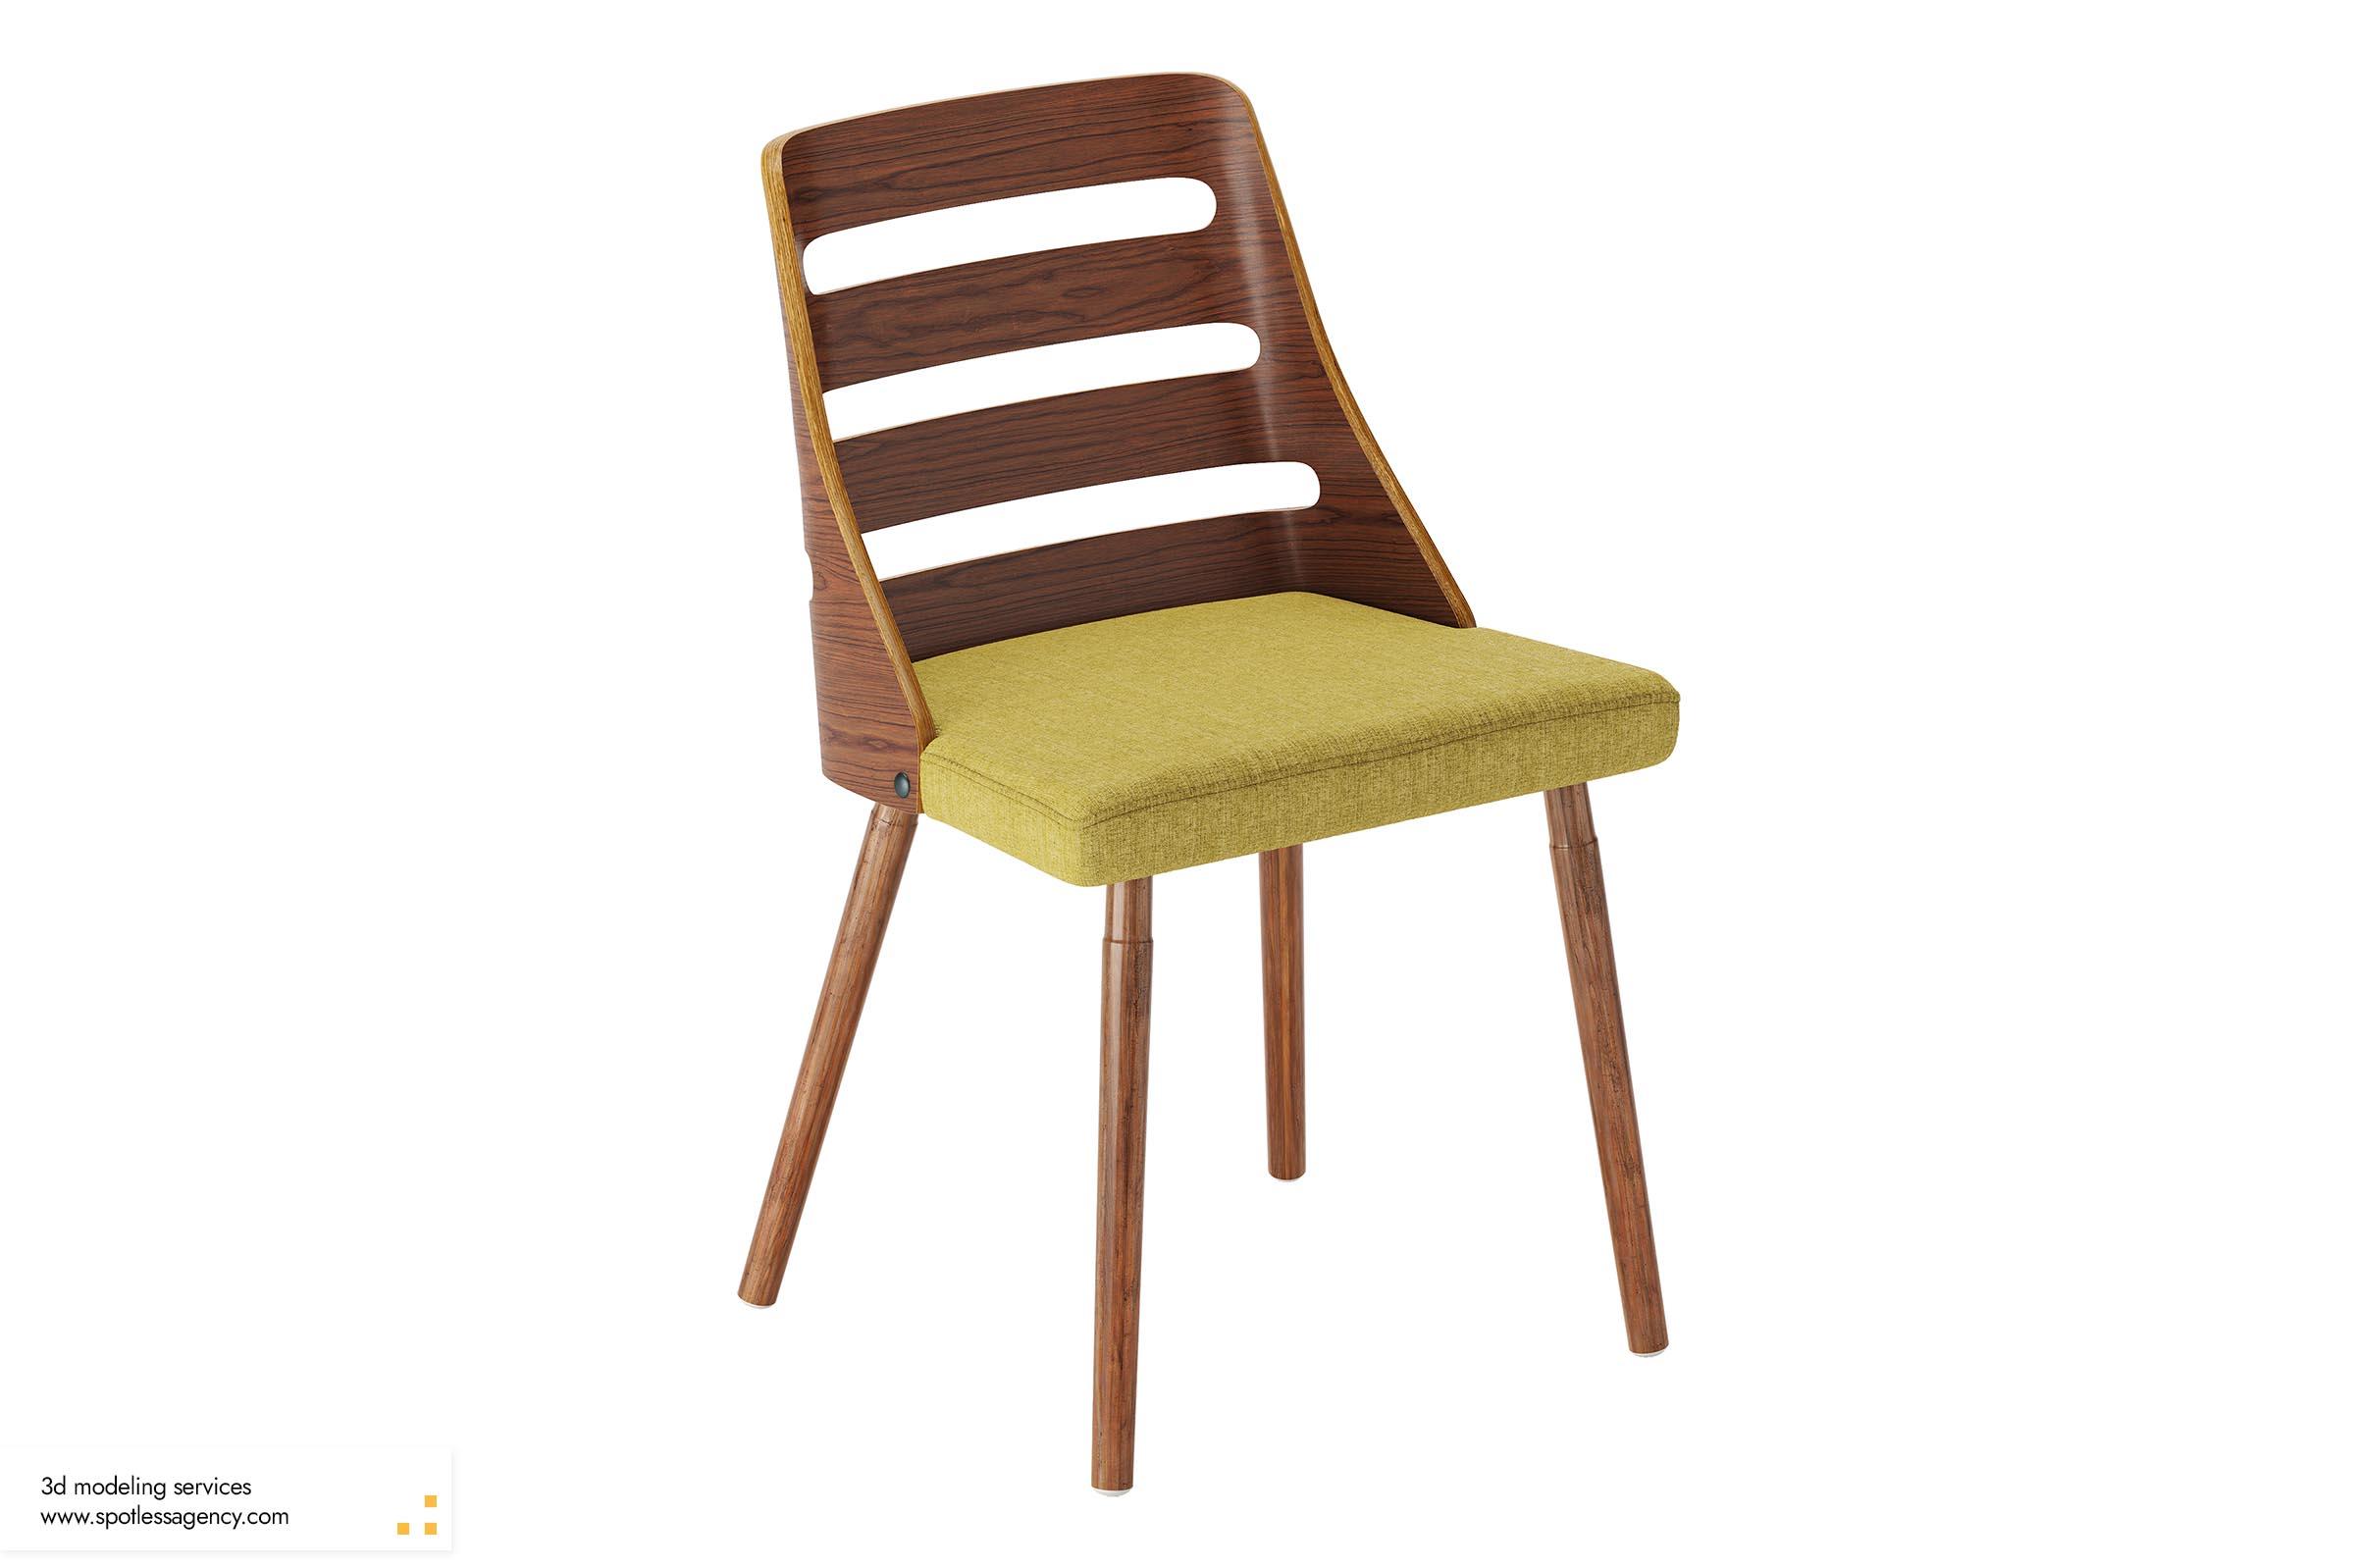 Chairs part 2 - 3d Modeling Services